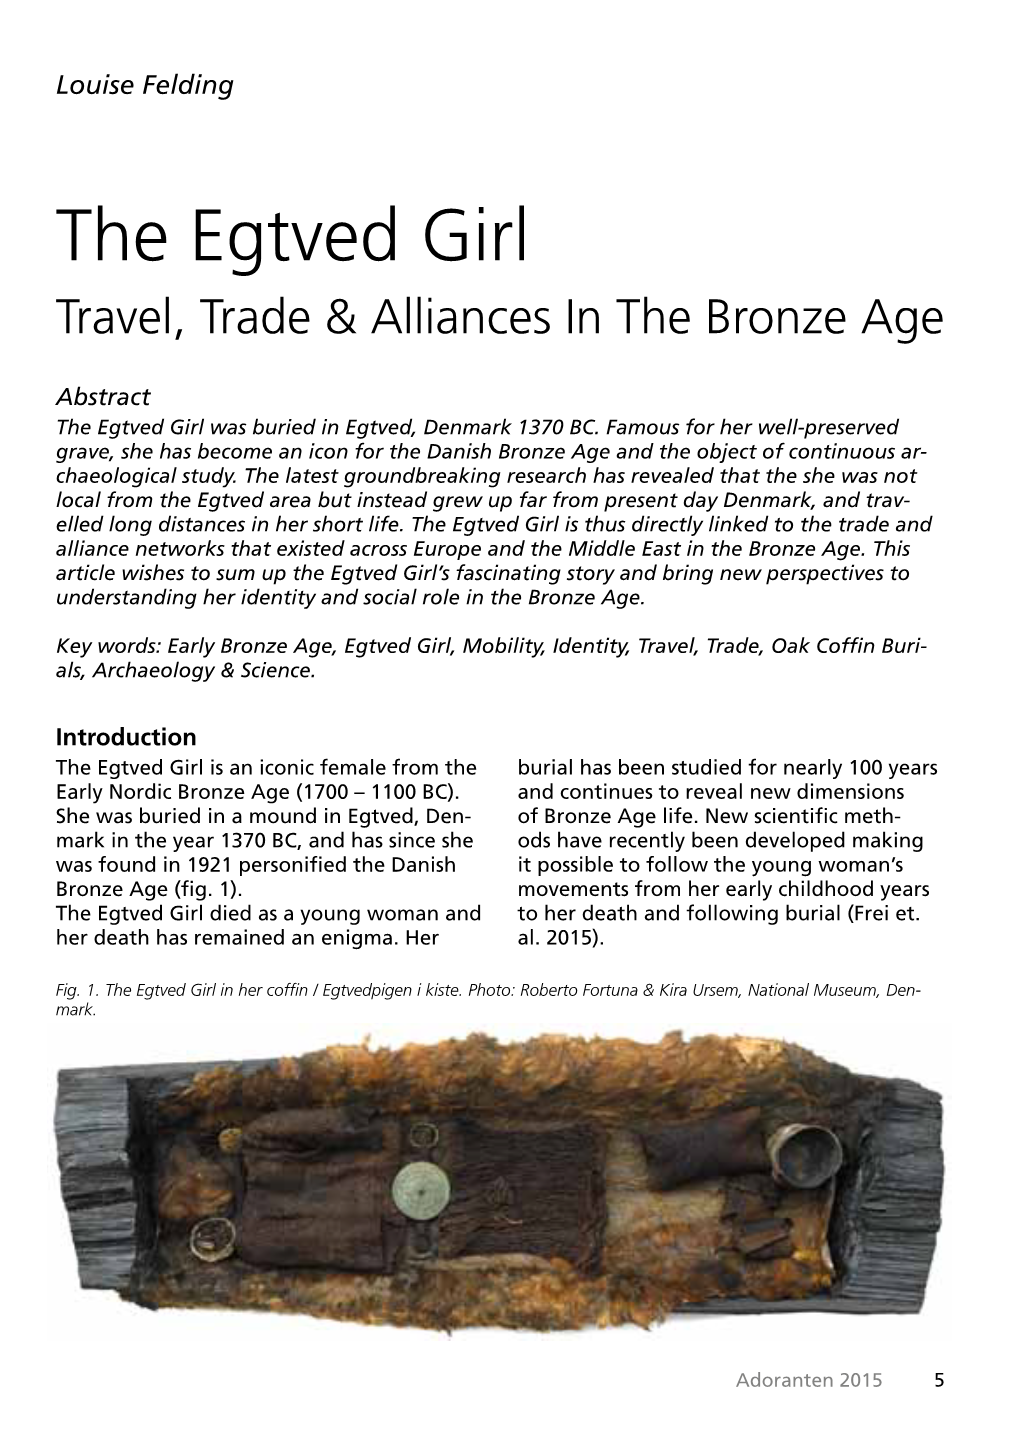 The Egtved Girl Travel, Trade & Alliances in the Bronze Age